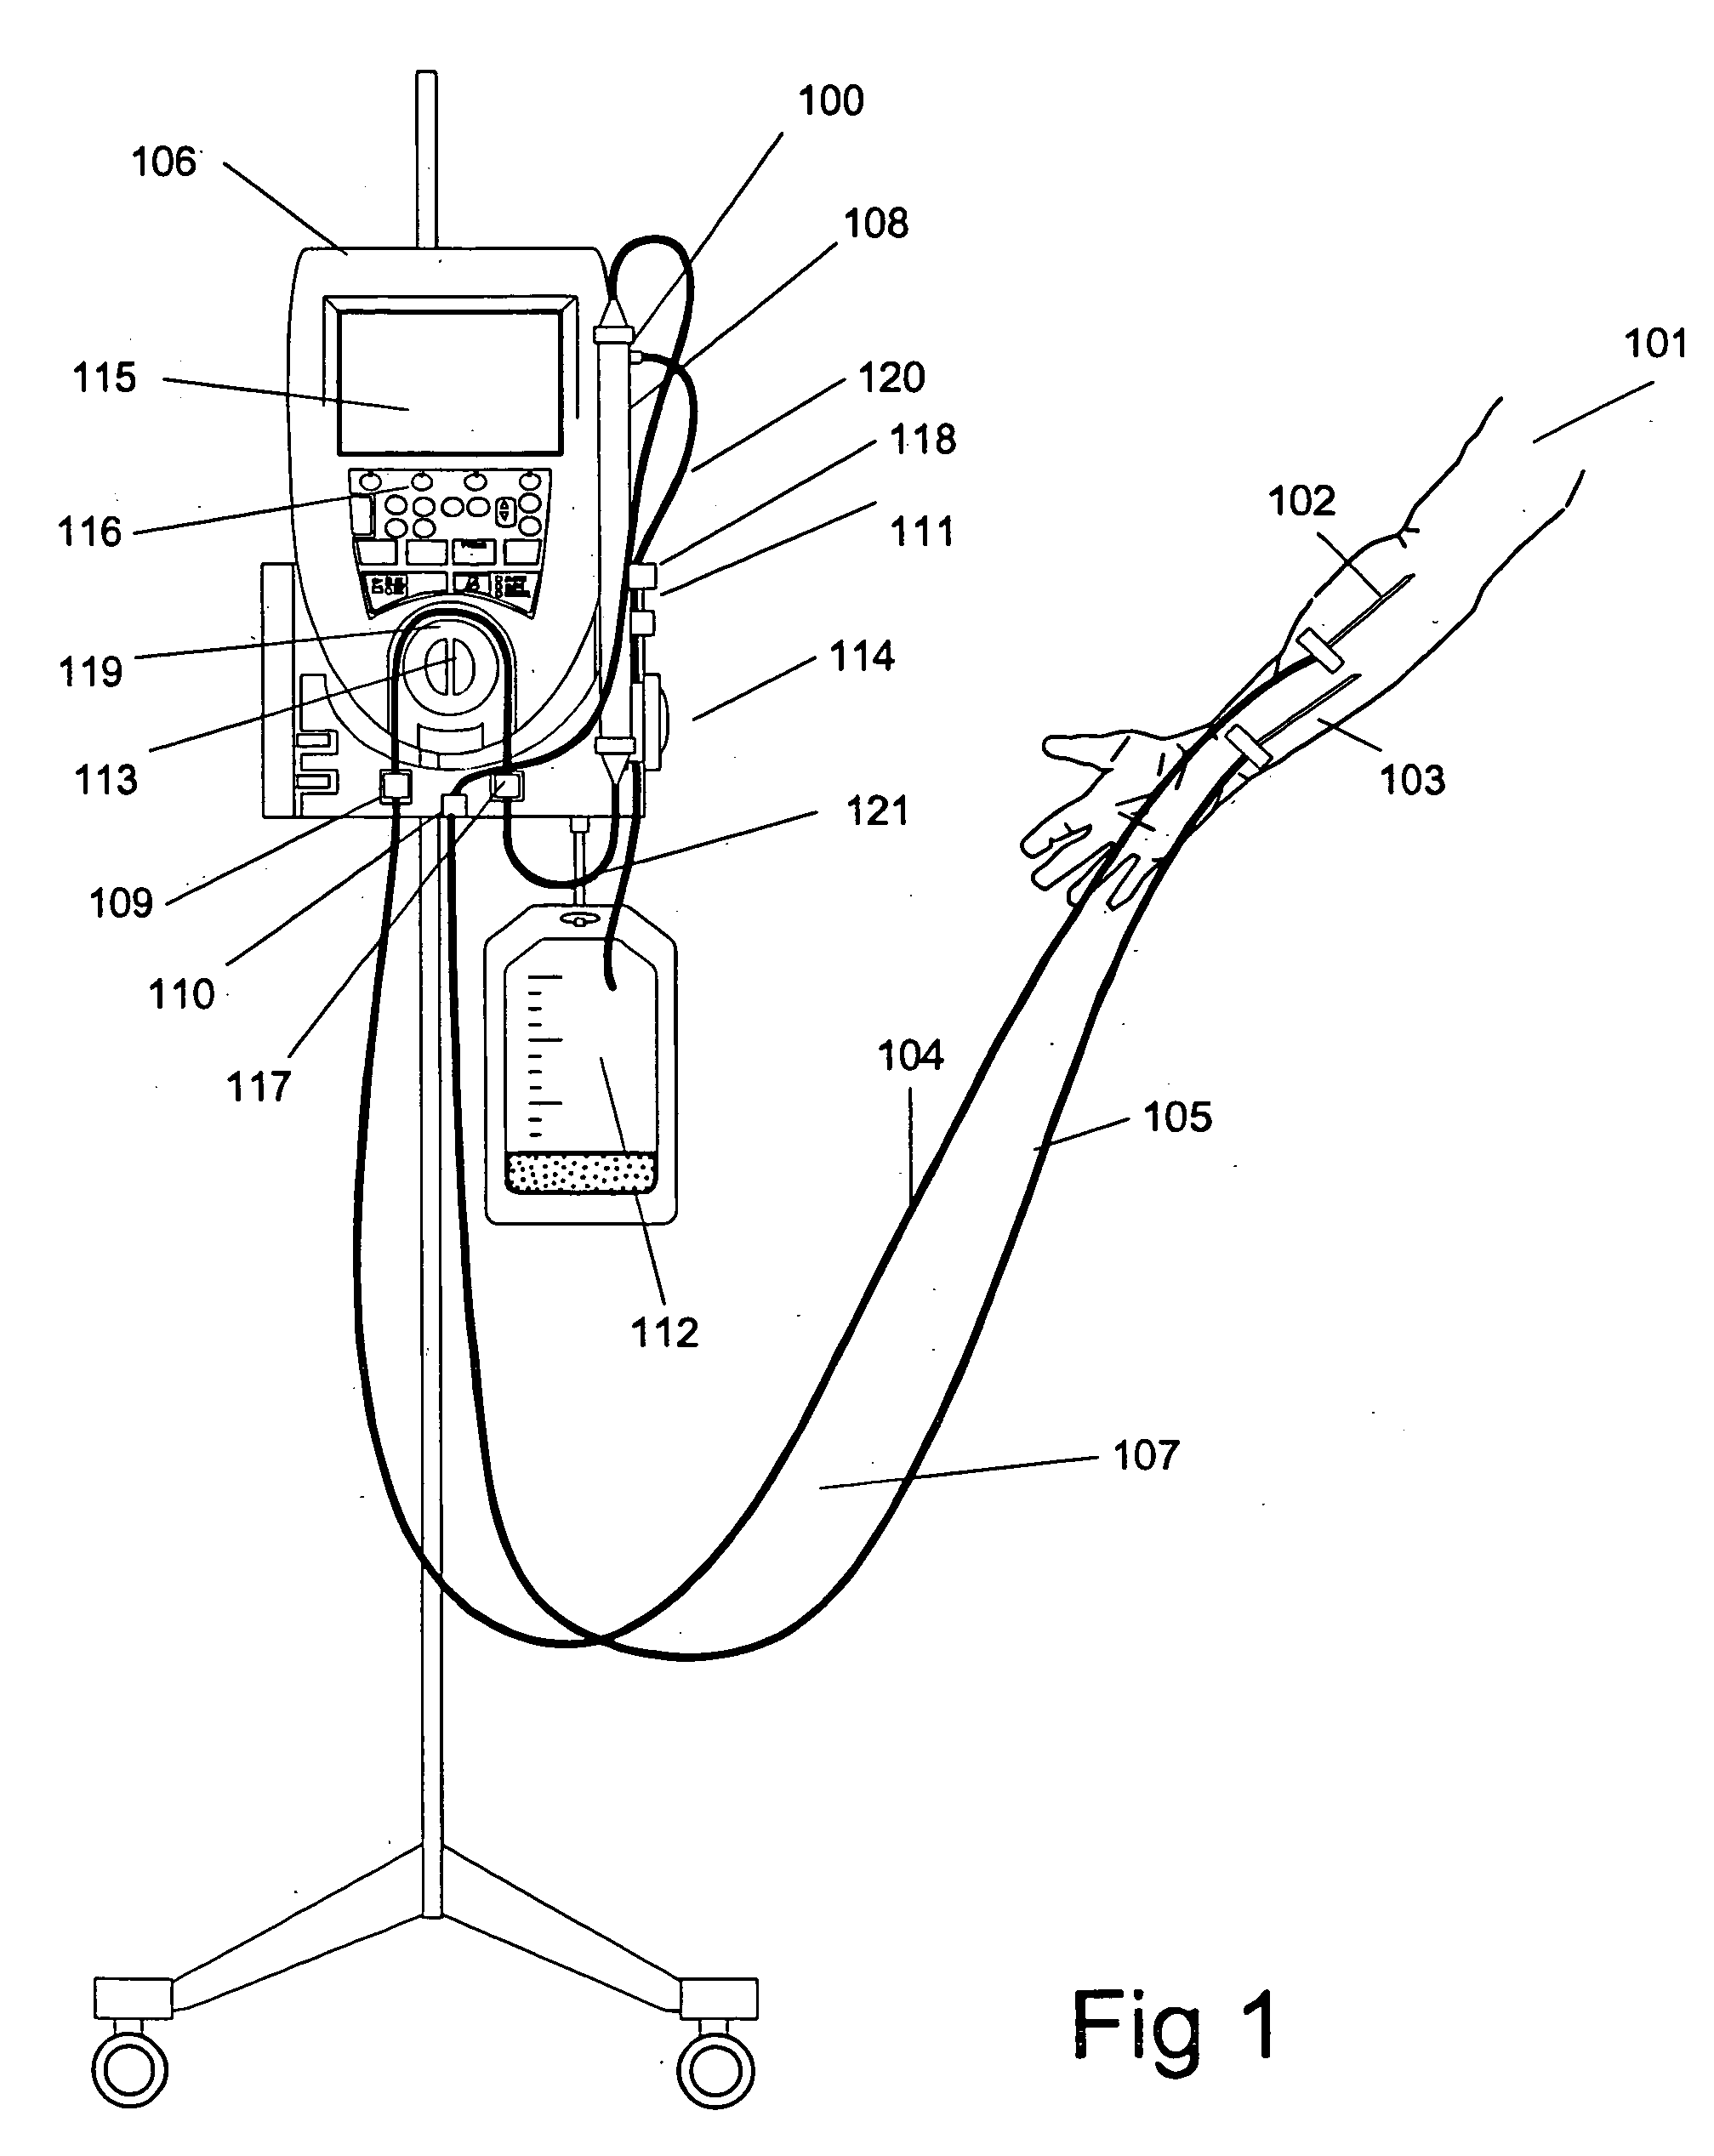 Method and apparatus for blood withdrawal and infusion using a pressure controller